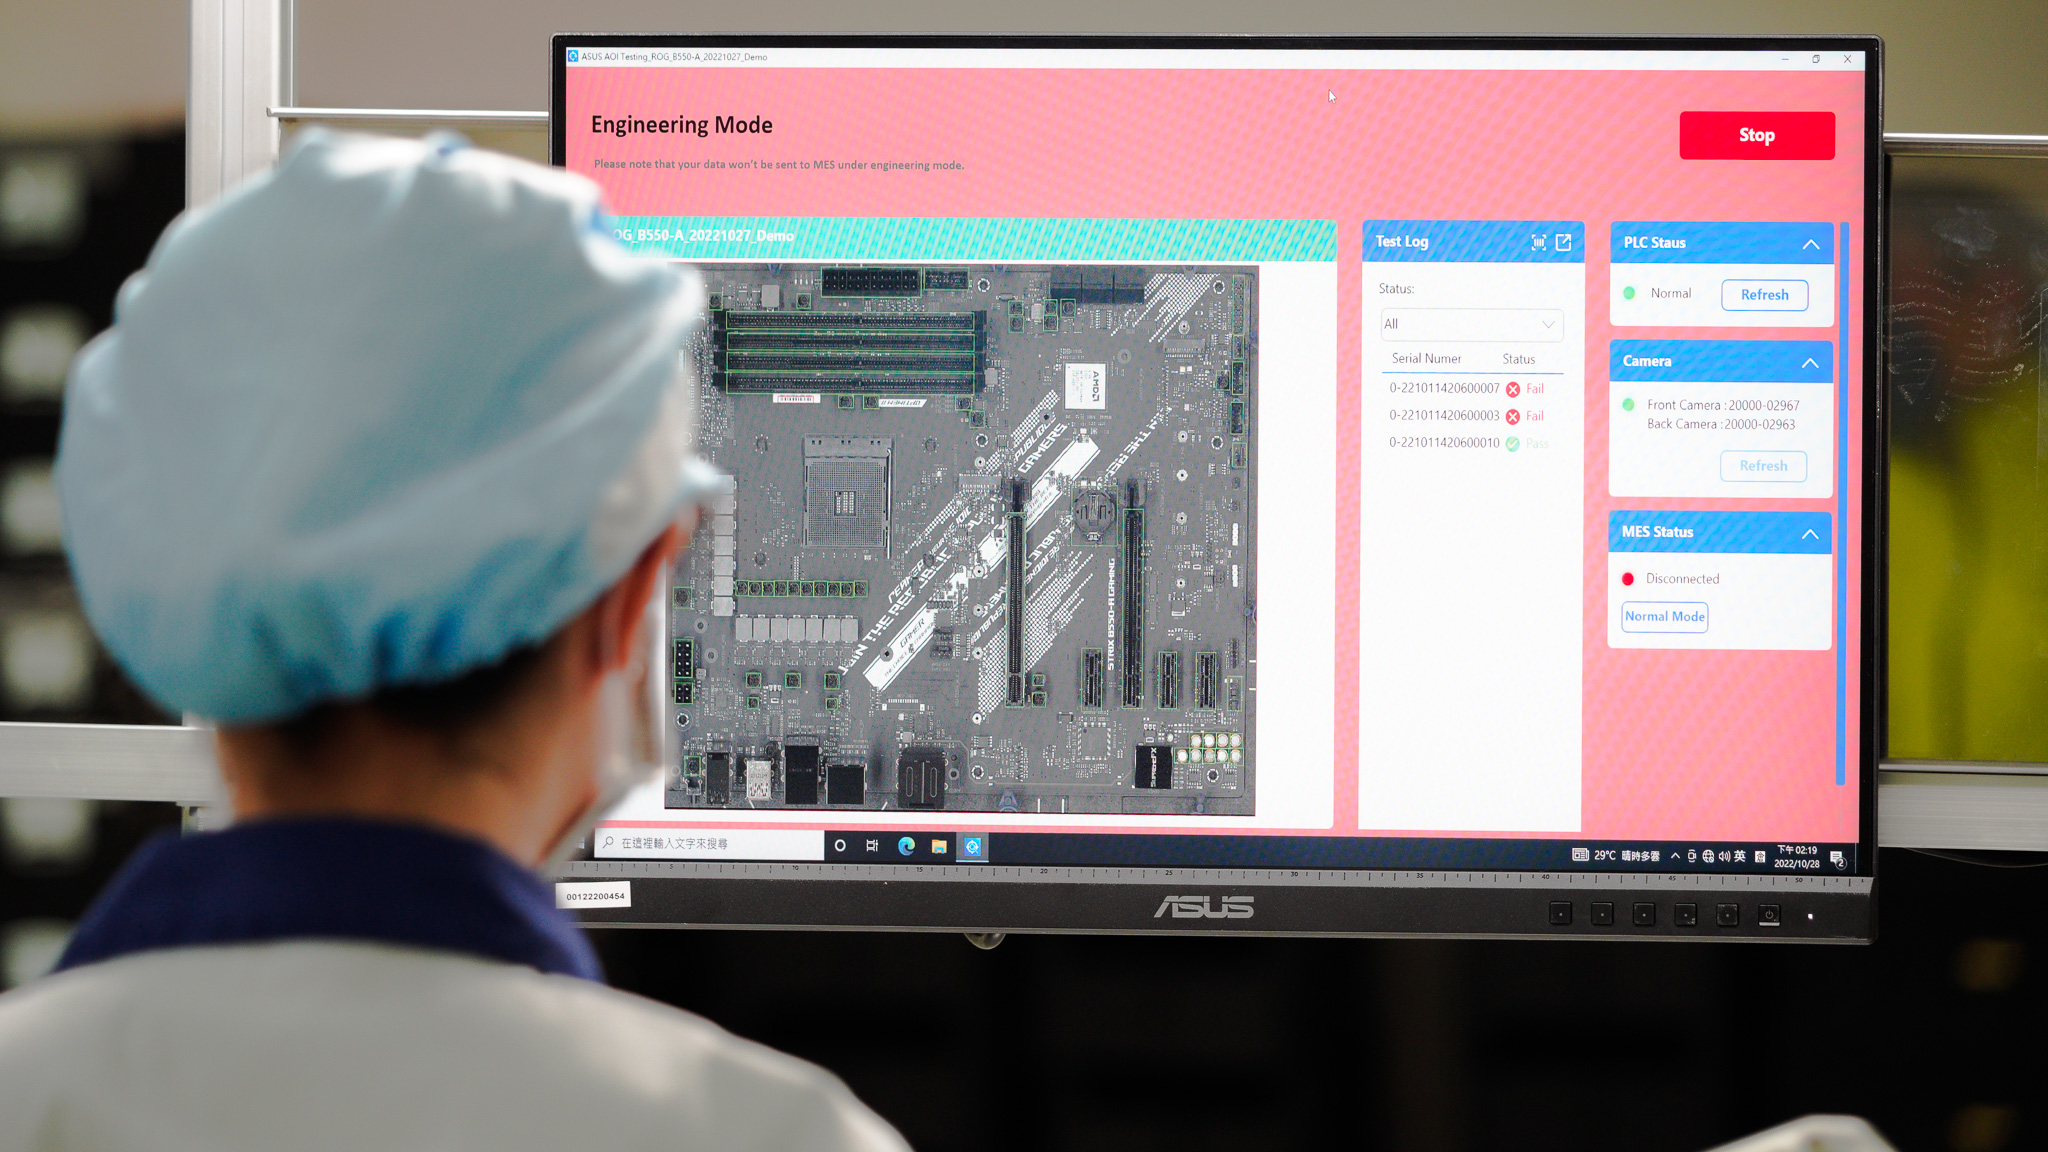 The picture shows a person wearing a hat and a blue cap intently staring at a computer screen. The image is associated with 'Pre-DIP wave soldering smart defect detection equipment'.